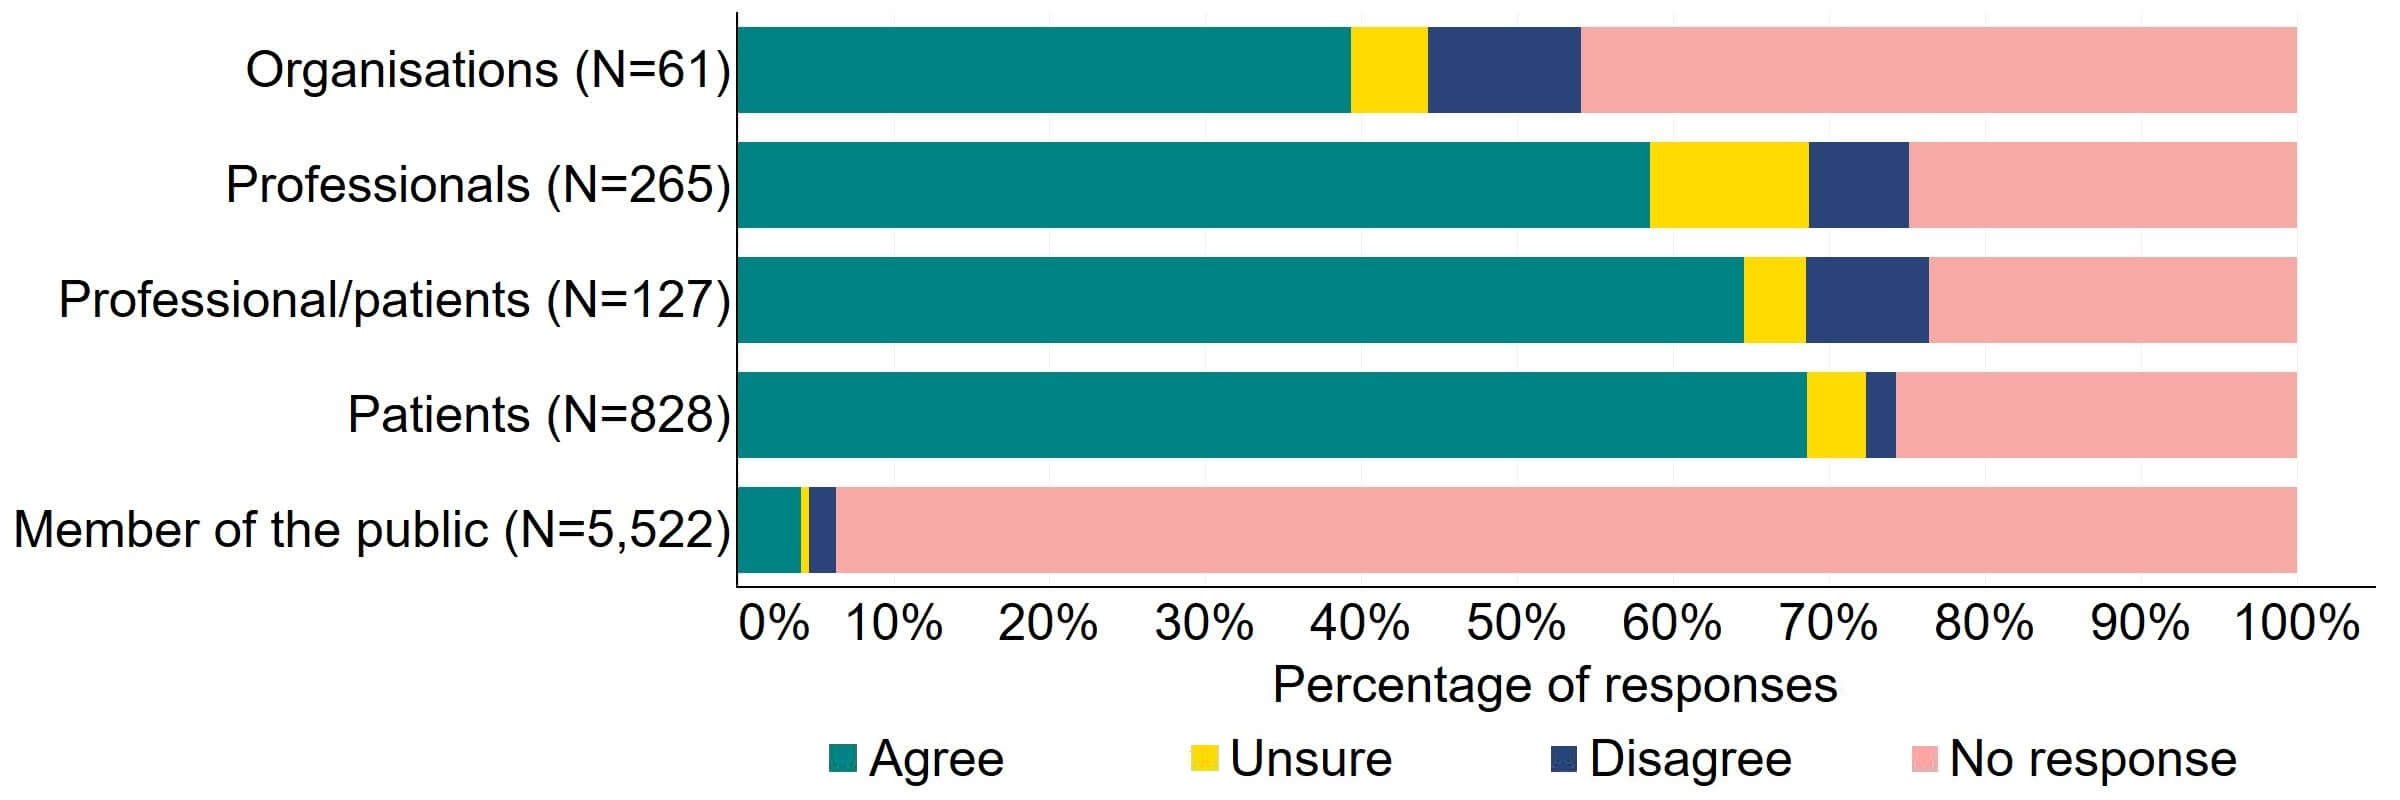 Figure 3 is a stacked bar chart showing the proportion of respondents in each response group who agreed, disagreed, were unsure, or who did not provide a response to the proposal. The underlying data can be downloaded as an Excel worksheet at the top of the page.